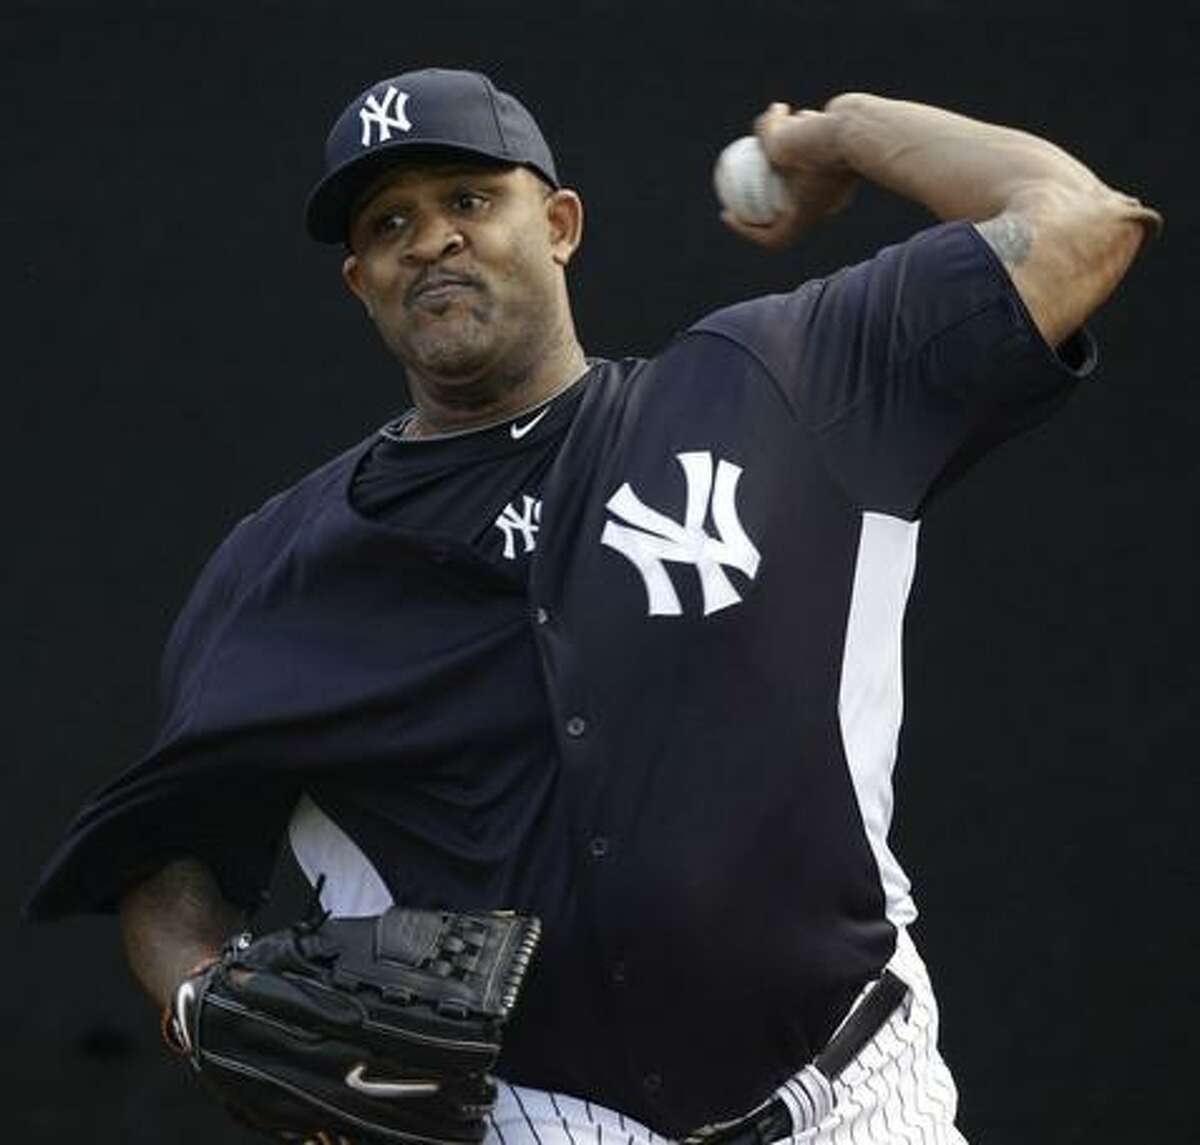 New York Yankees pitcher CC Sabathia throws in the bullpen during a baseball spring training workout Tuesday, Feb. 22, 2011, at Steinbrenner Field in Tampa, Fla. (AP Photo/Charlie Neibergall)